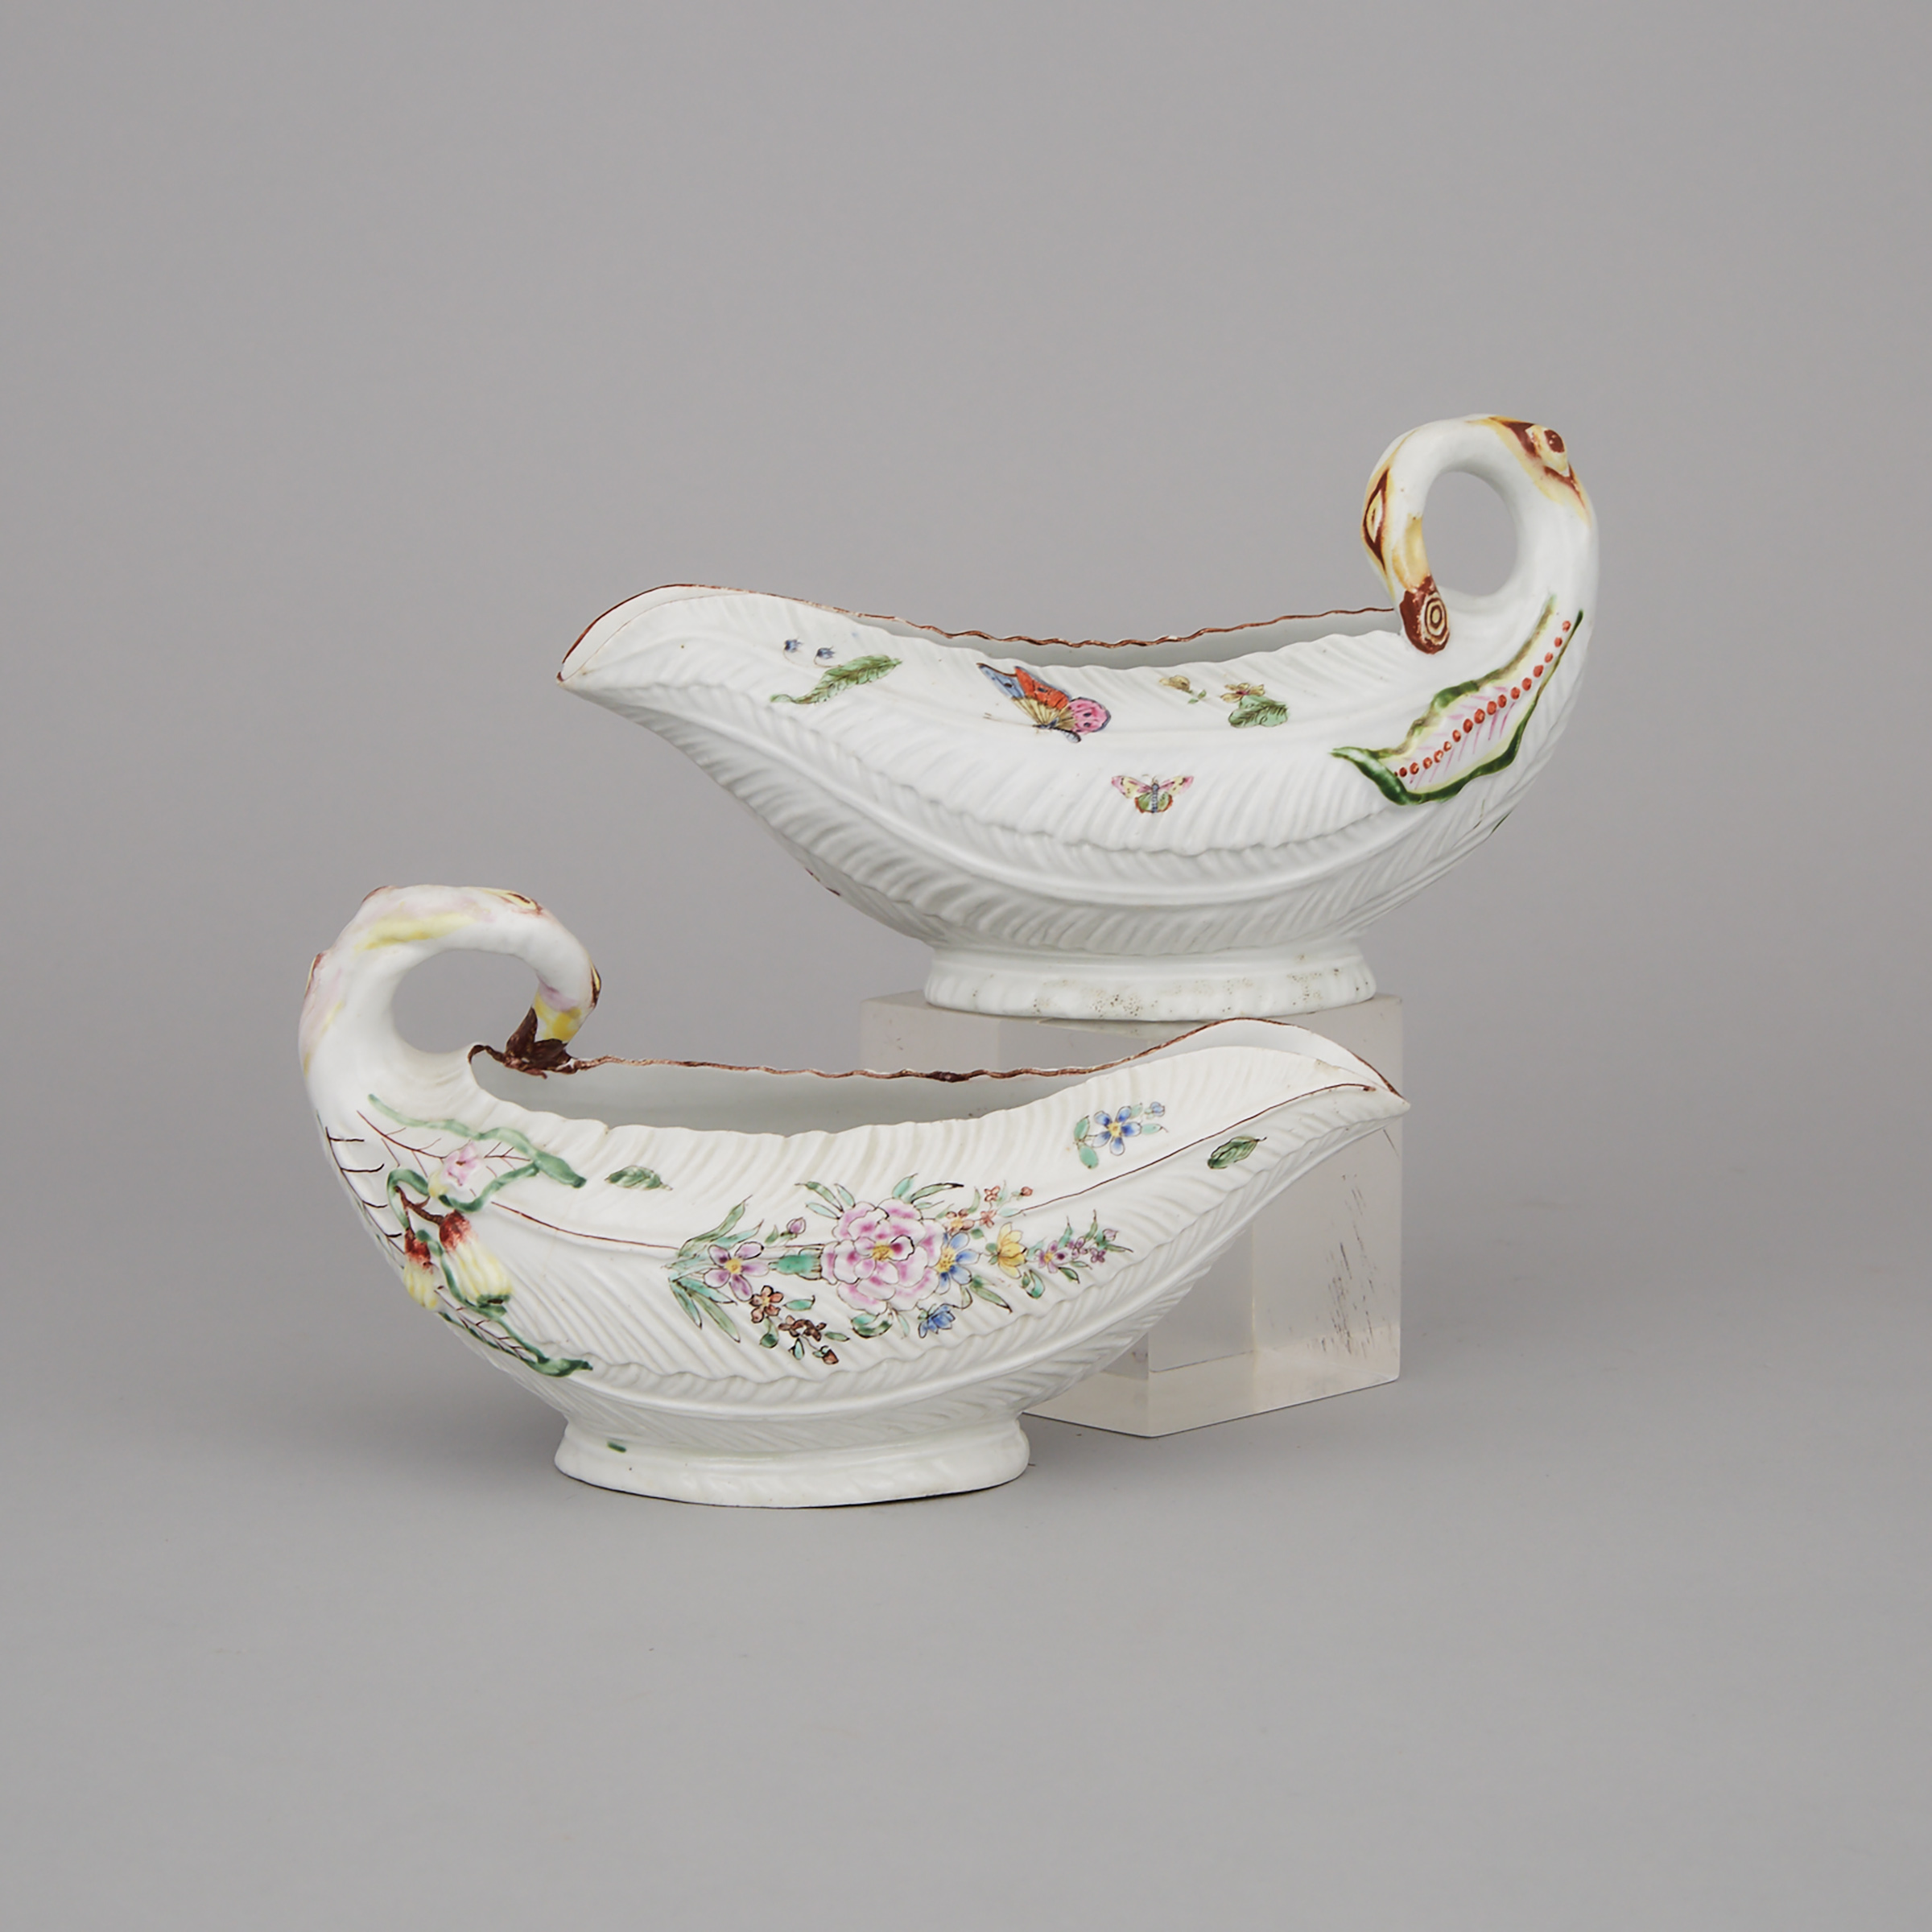 Pair of Worcester Cos Lettuce Leaf Sauce Boats, c.1755-60